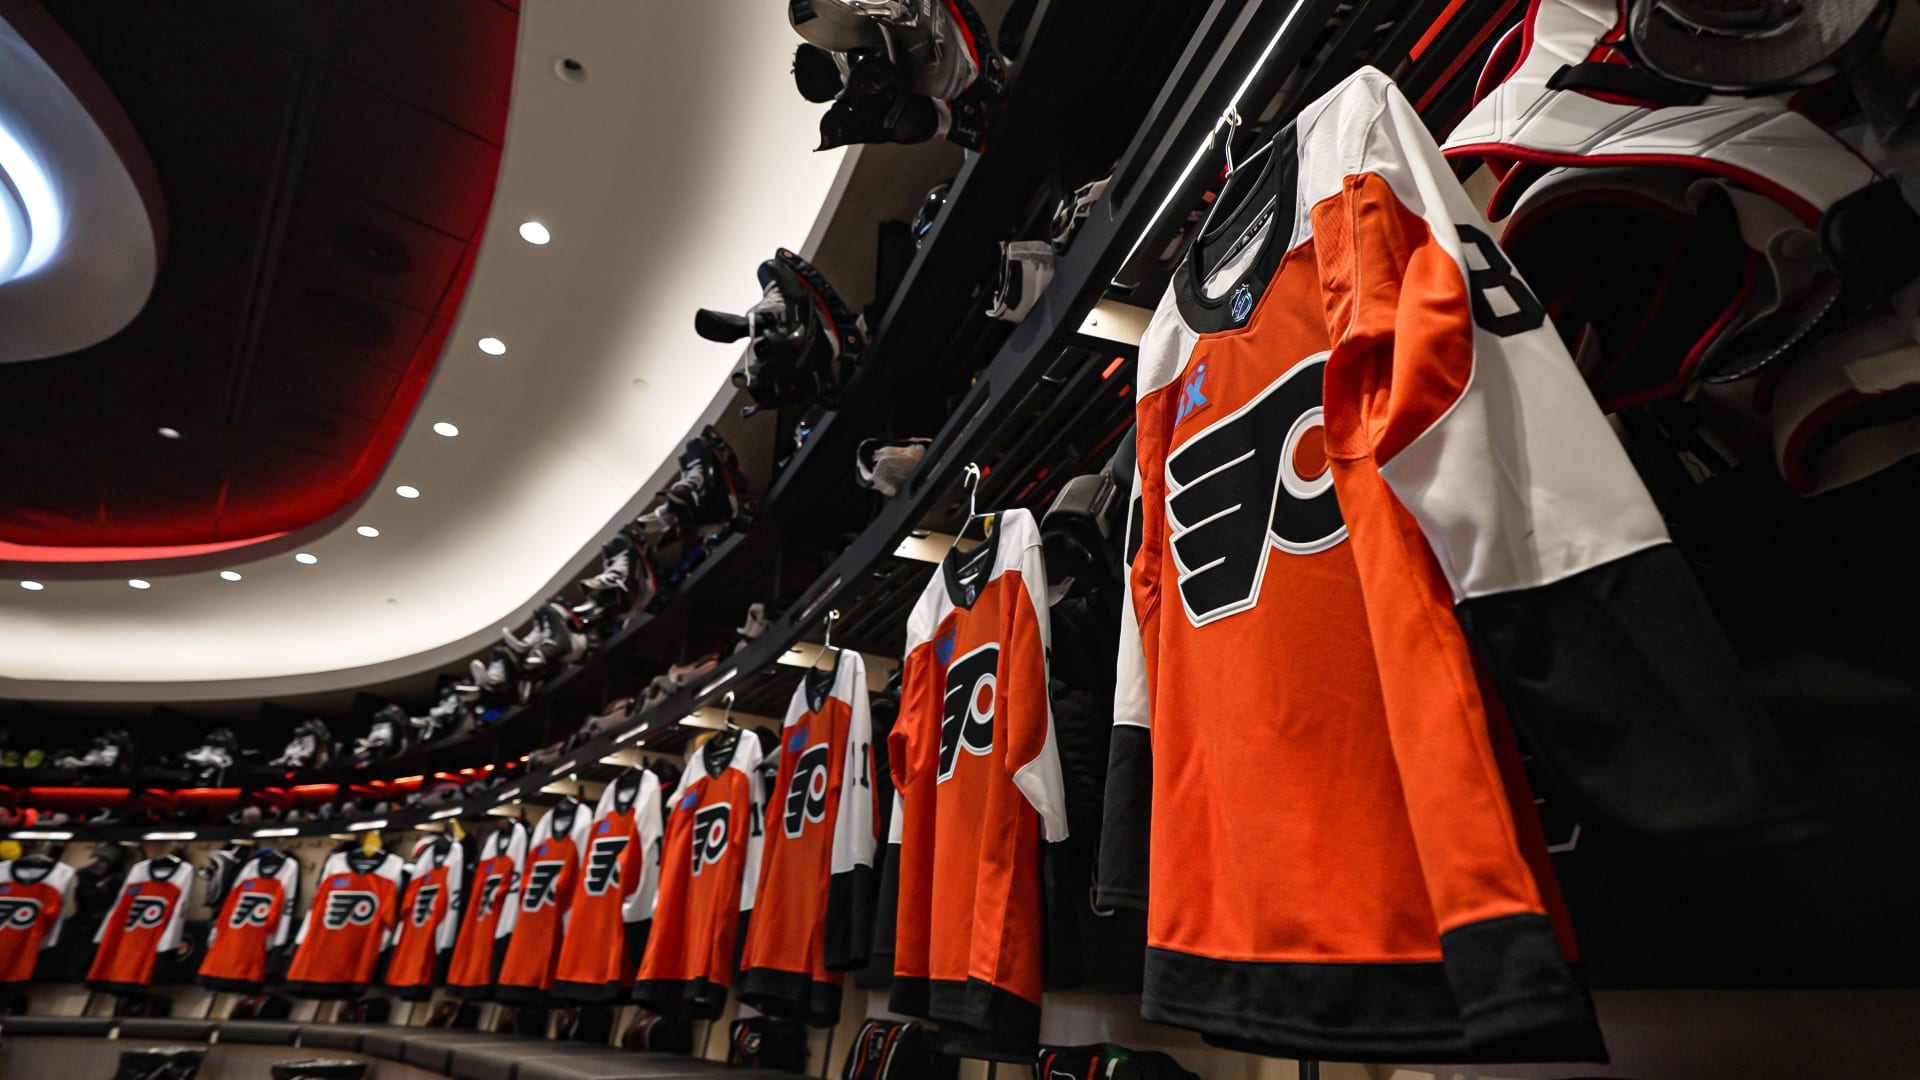 Flyers New Locker Room Has Practical and Symbolic Meaning